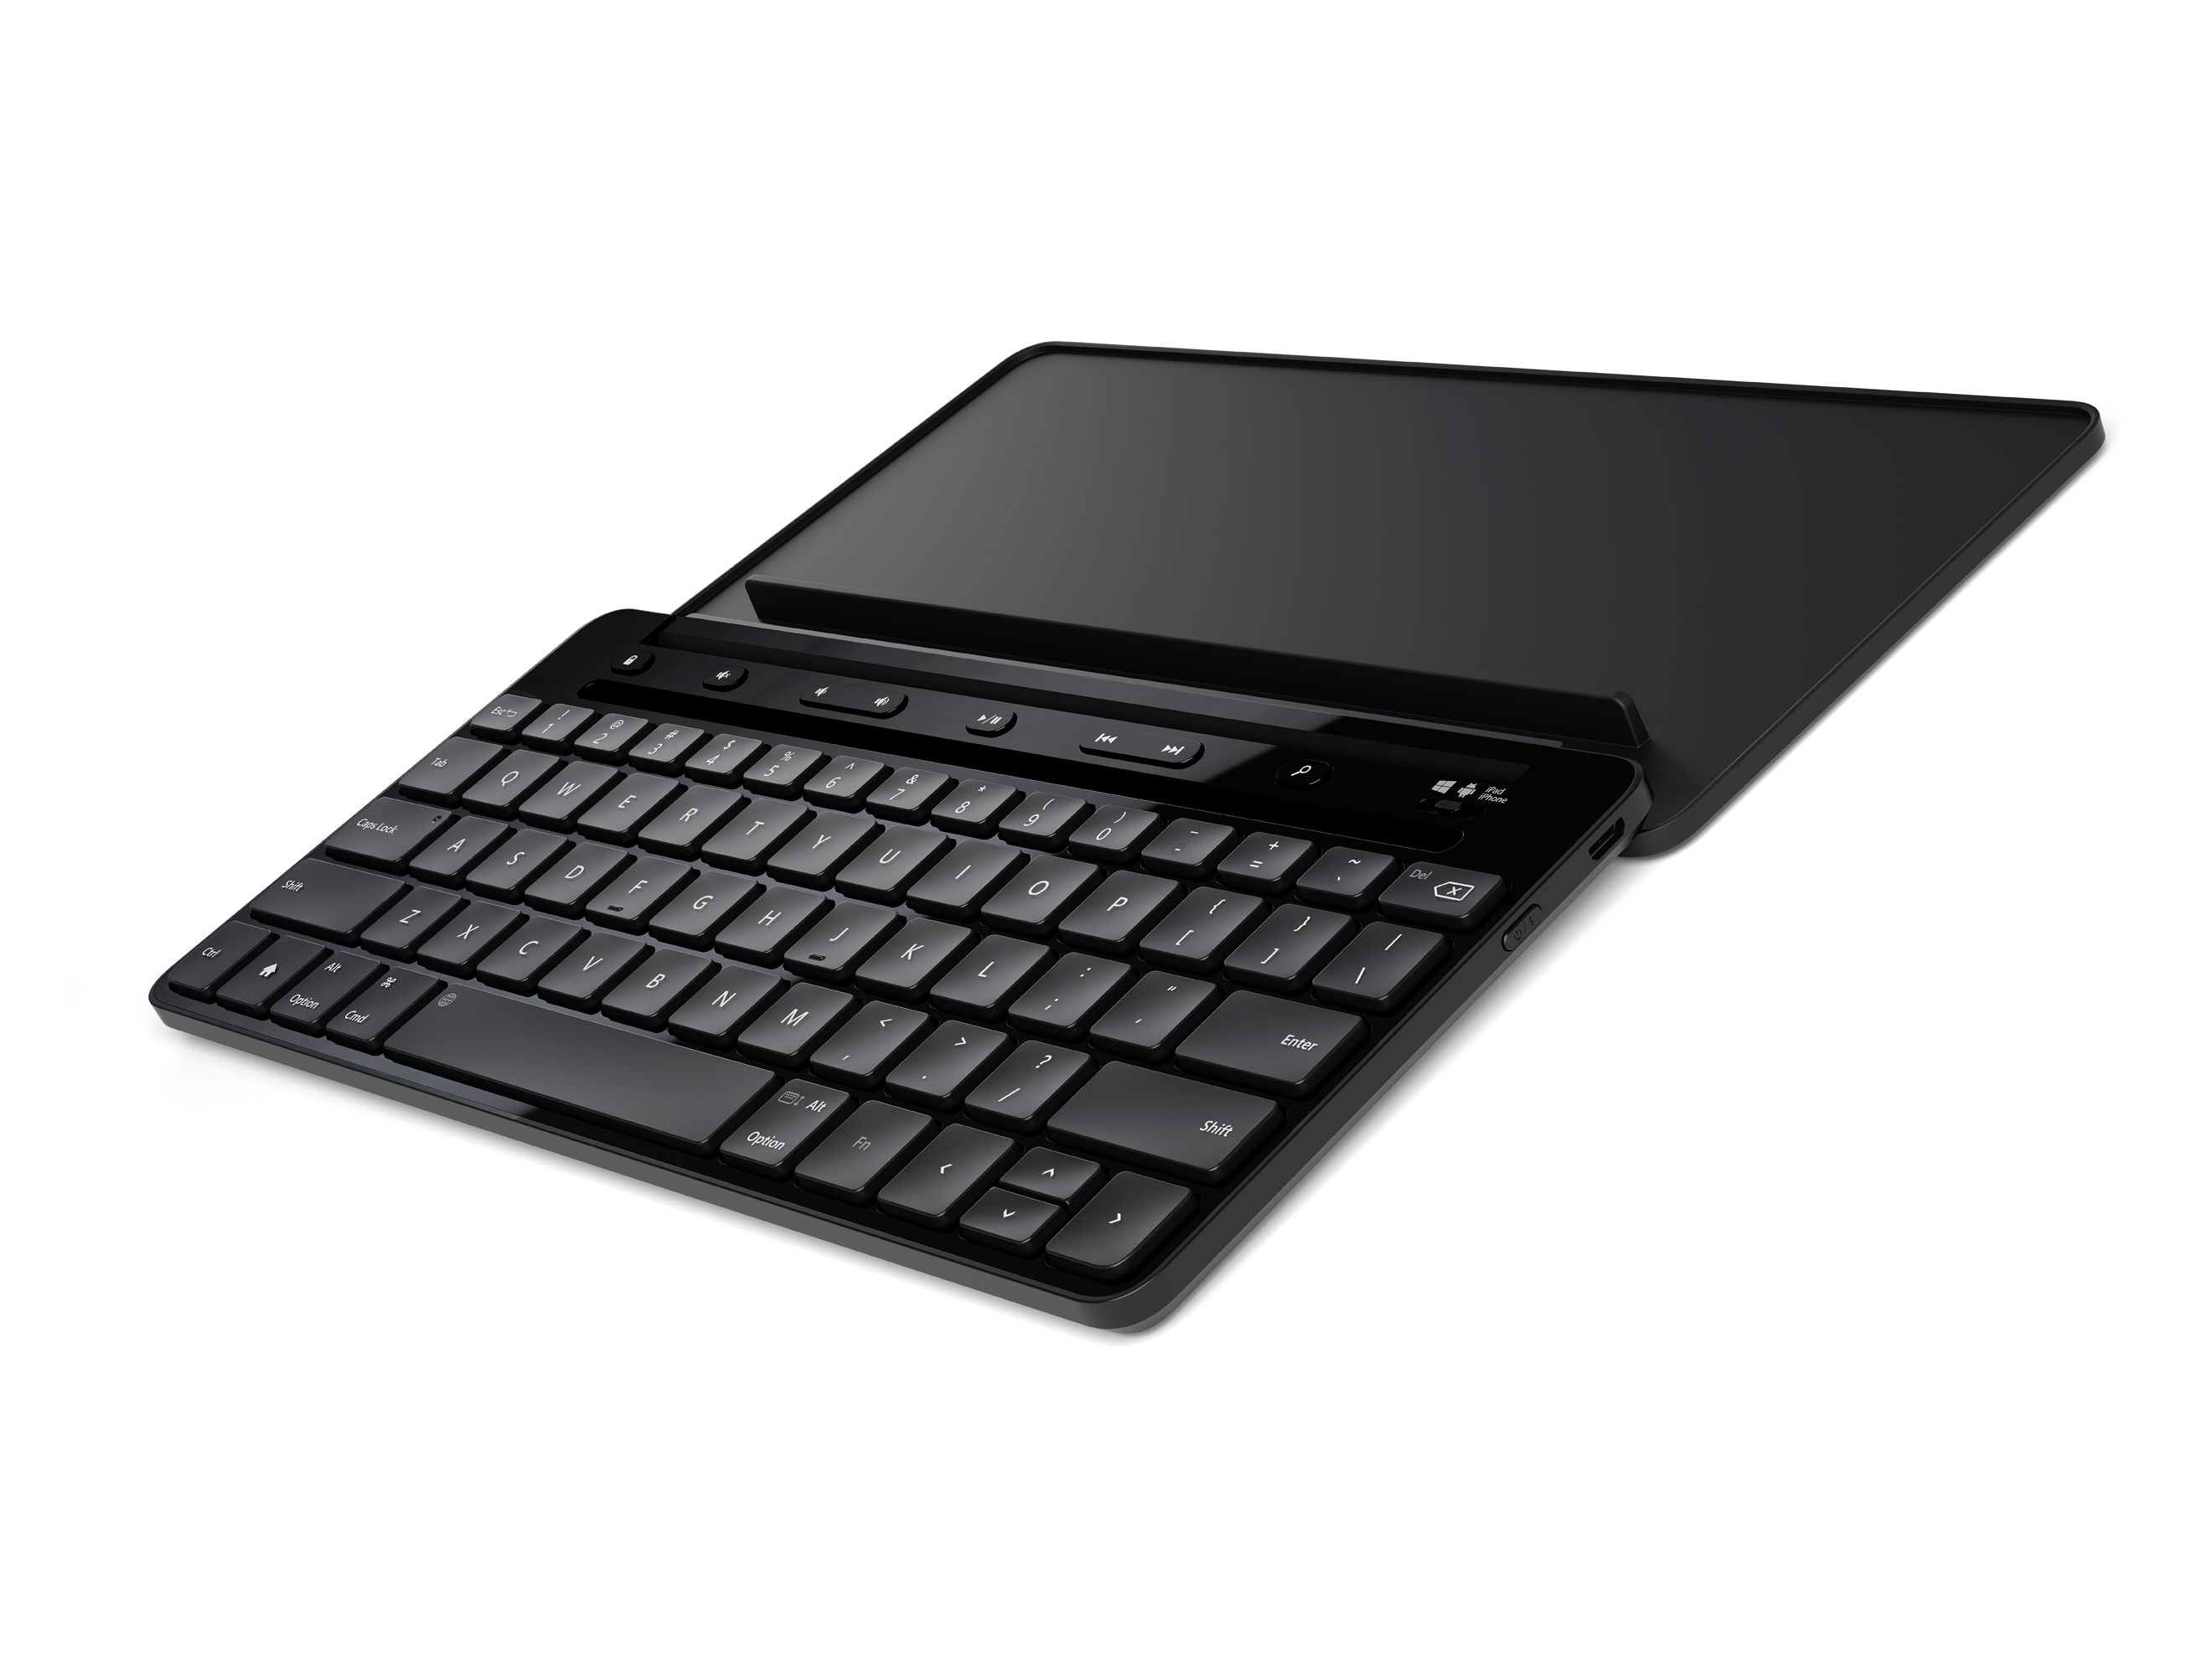 Microsoft Hardware now offers a Bluetooth keyboard that works with all mobile platforms